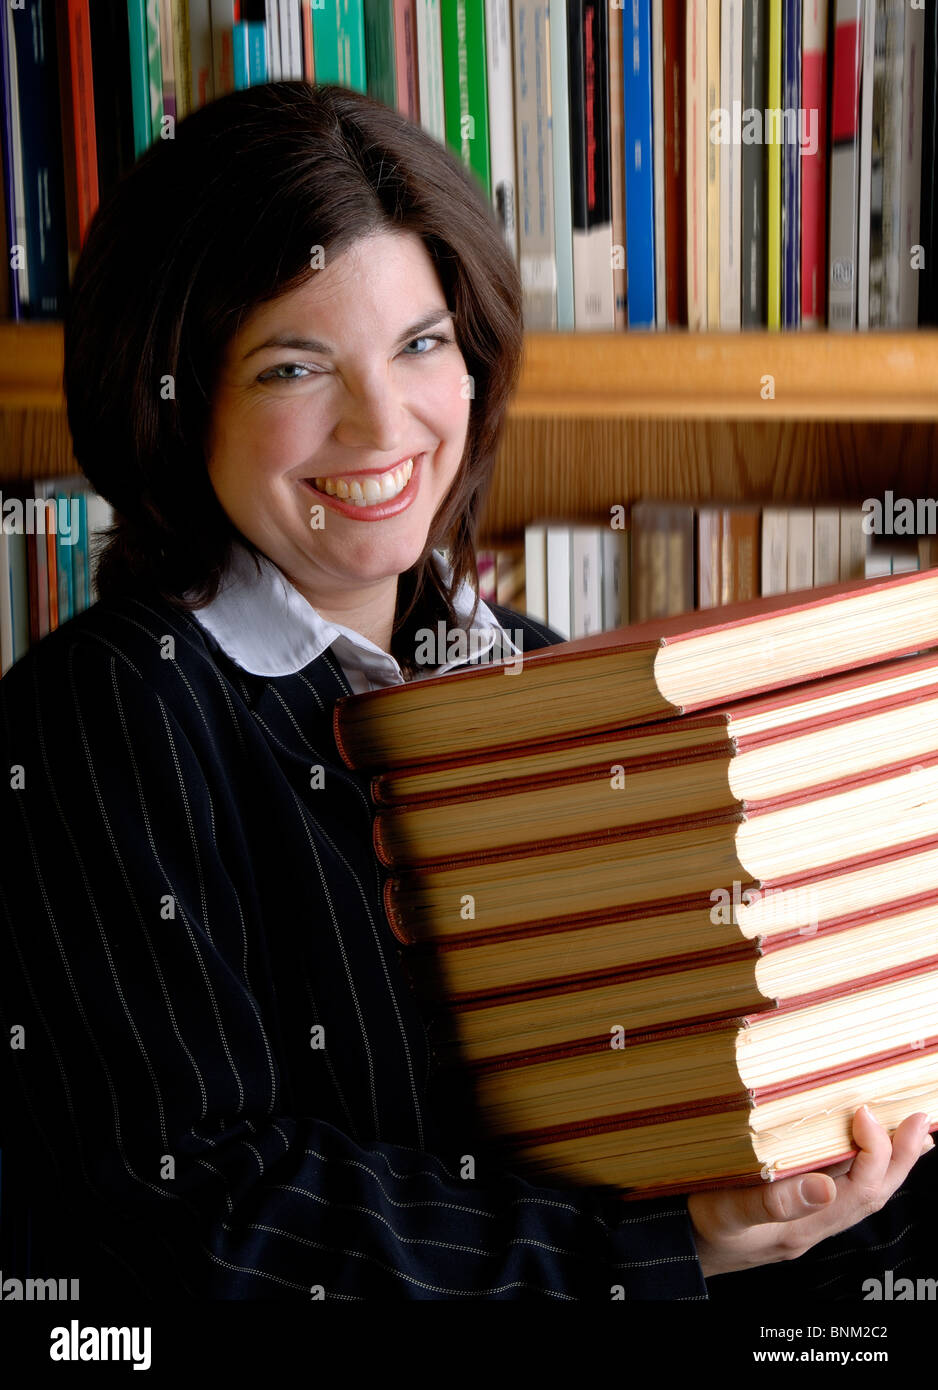 Young Female Lawyer Carrying Legal Text Books In A Library Stock Photo